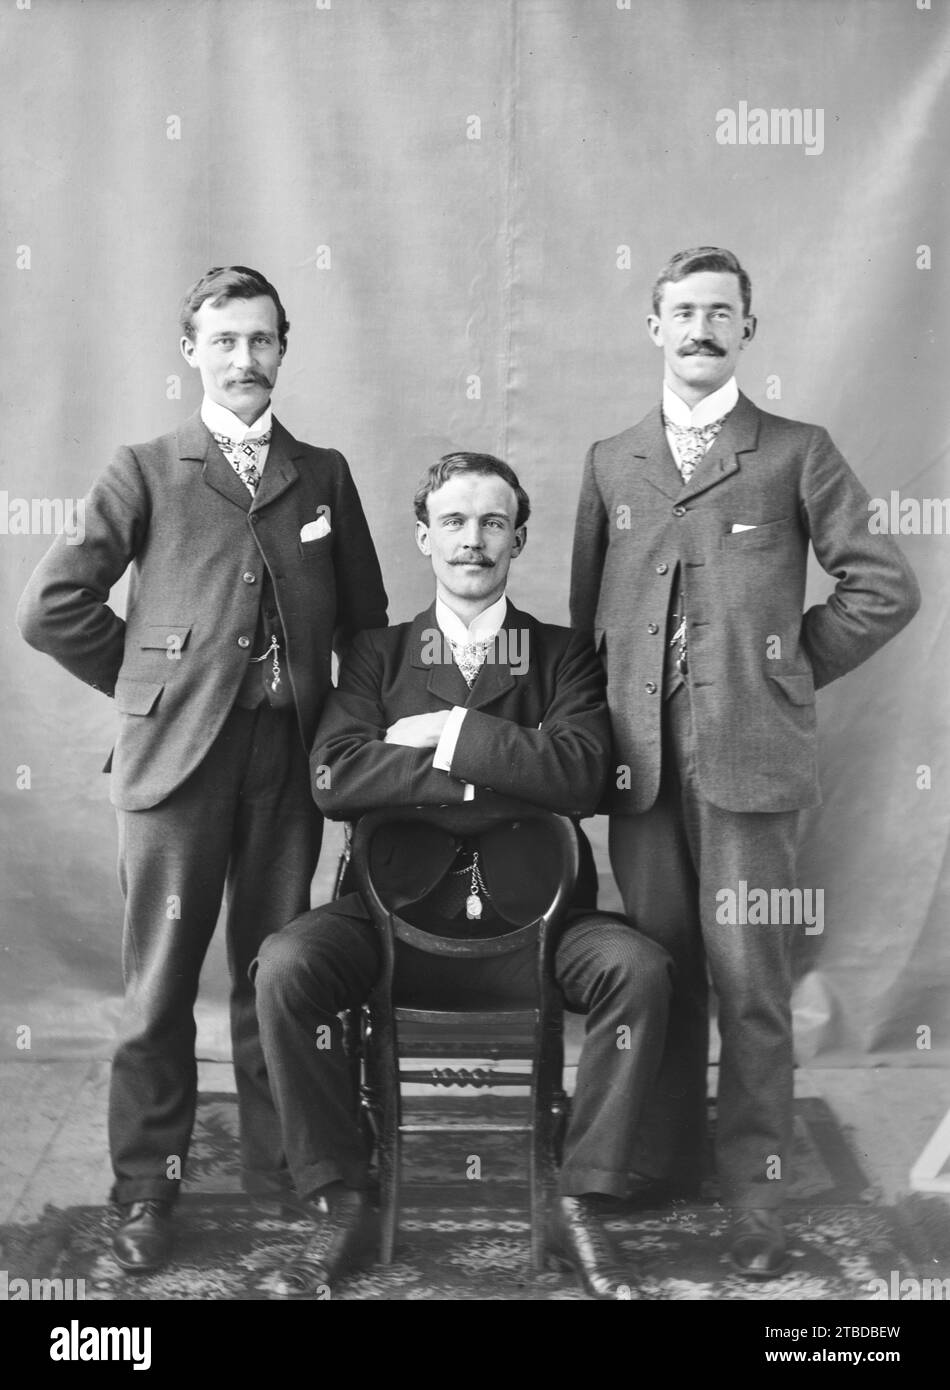 Edwardian formal studio portrait of three men in suits, one sitting and two standing. Cravats and stiff collars.  Taken from a vintage glass plate negative.  C1900 – 1910 Stock Photo